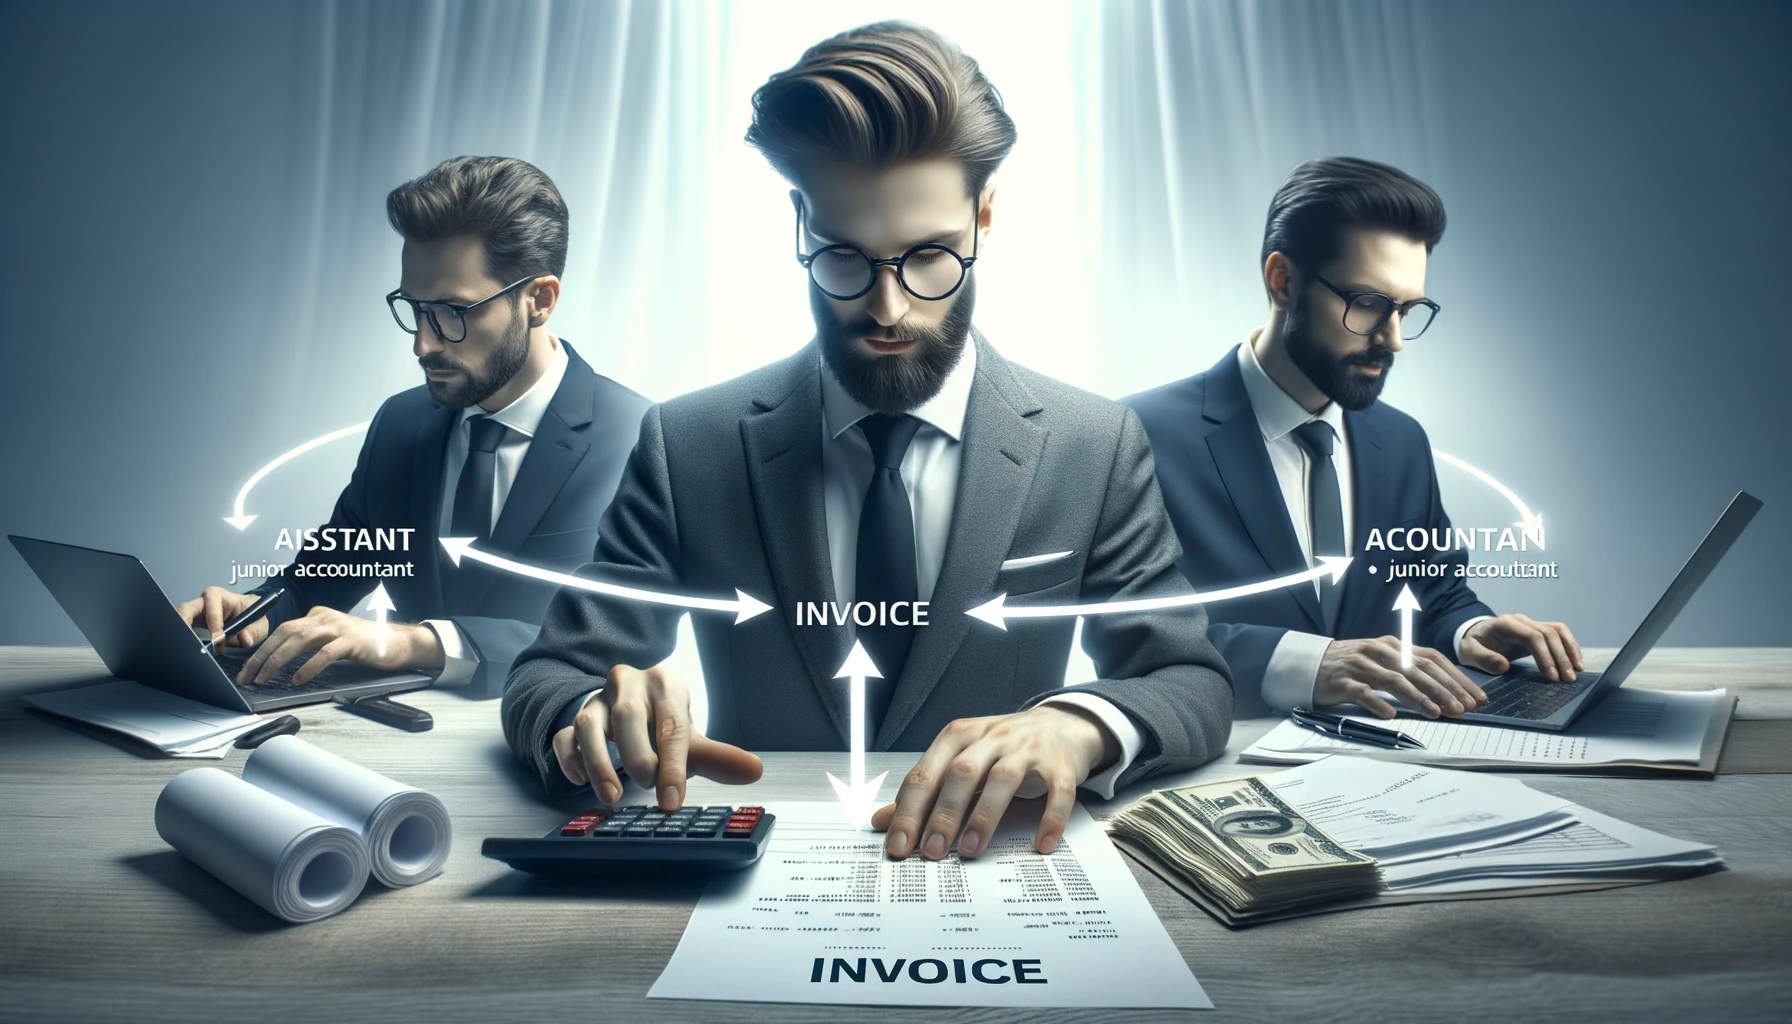 DALL·E 2023-10-14 17.32.46 - Professional and realistic image against a FCBE37 hue, 1200x600px in dimension. The setting captures an assistant, a manager, a junior accountant, and.png